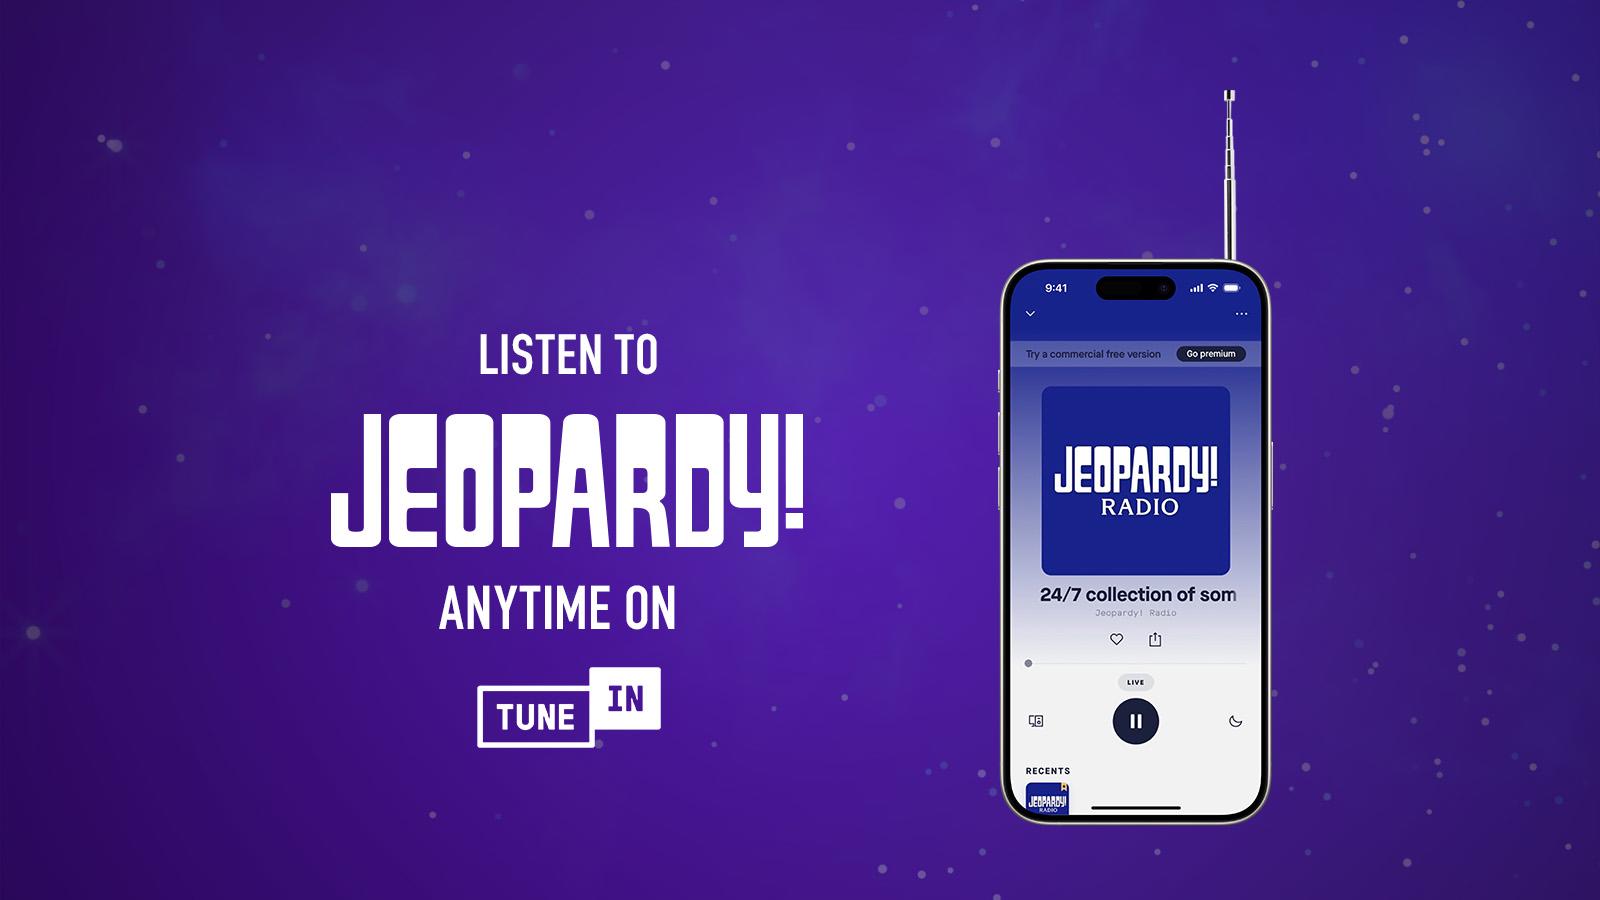 Listen to Jeopardy! Anytime on TuneIn 